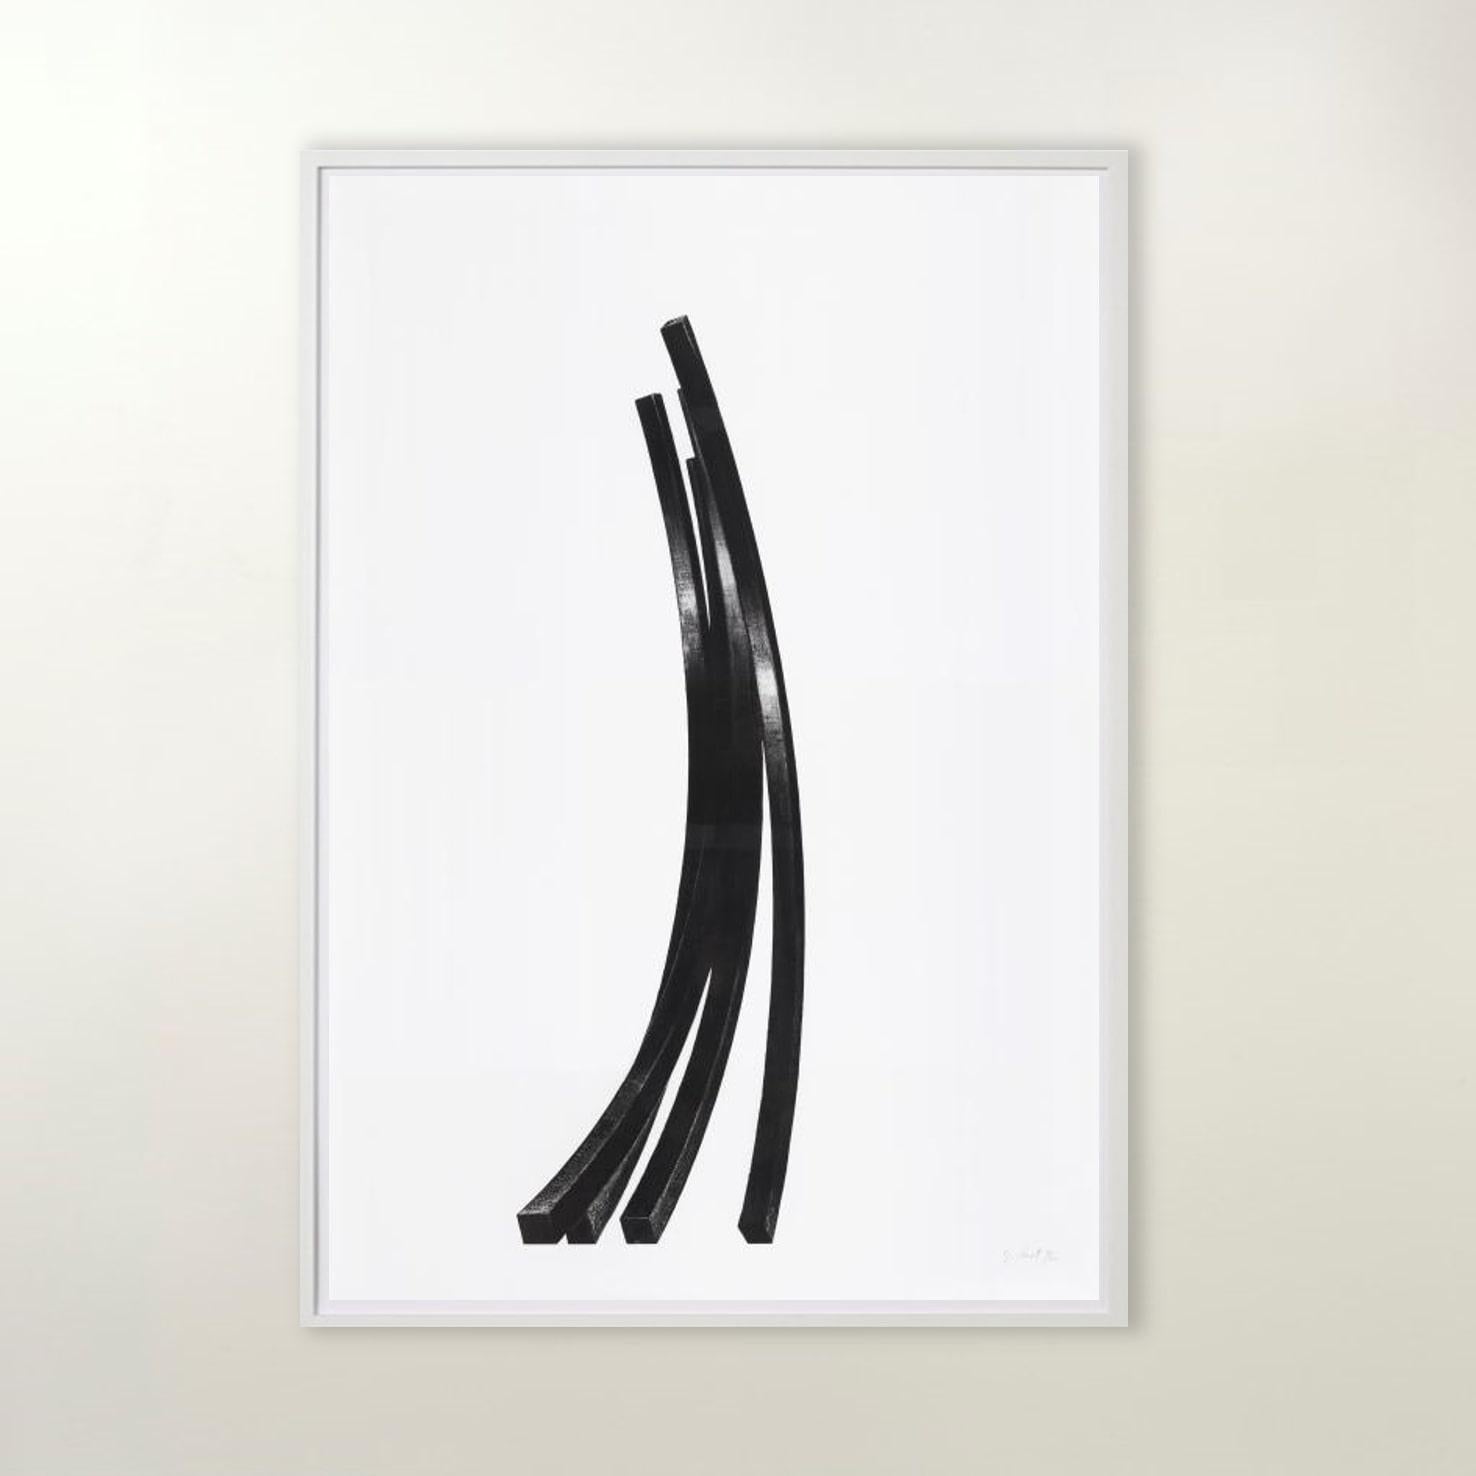 Arcs: Uneven Angles - Contemporary, 21st Century, Etching, Black, White, Edition - Print by Bernar Venet